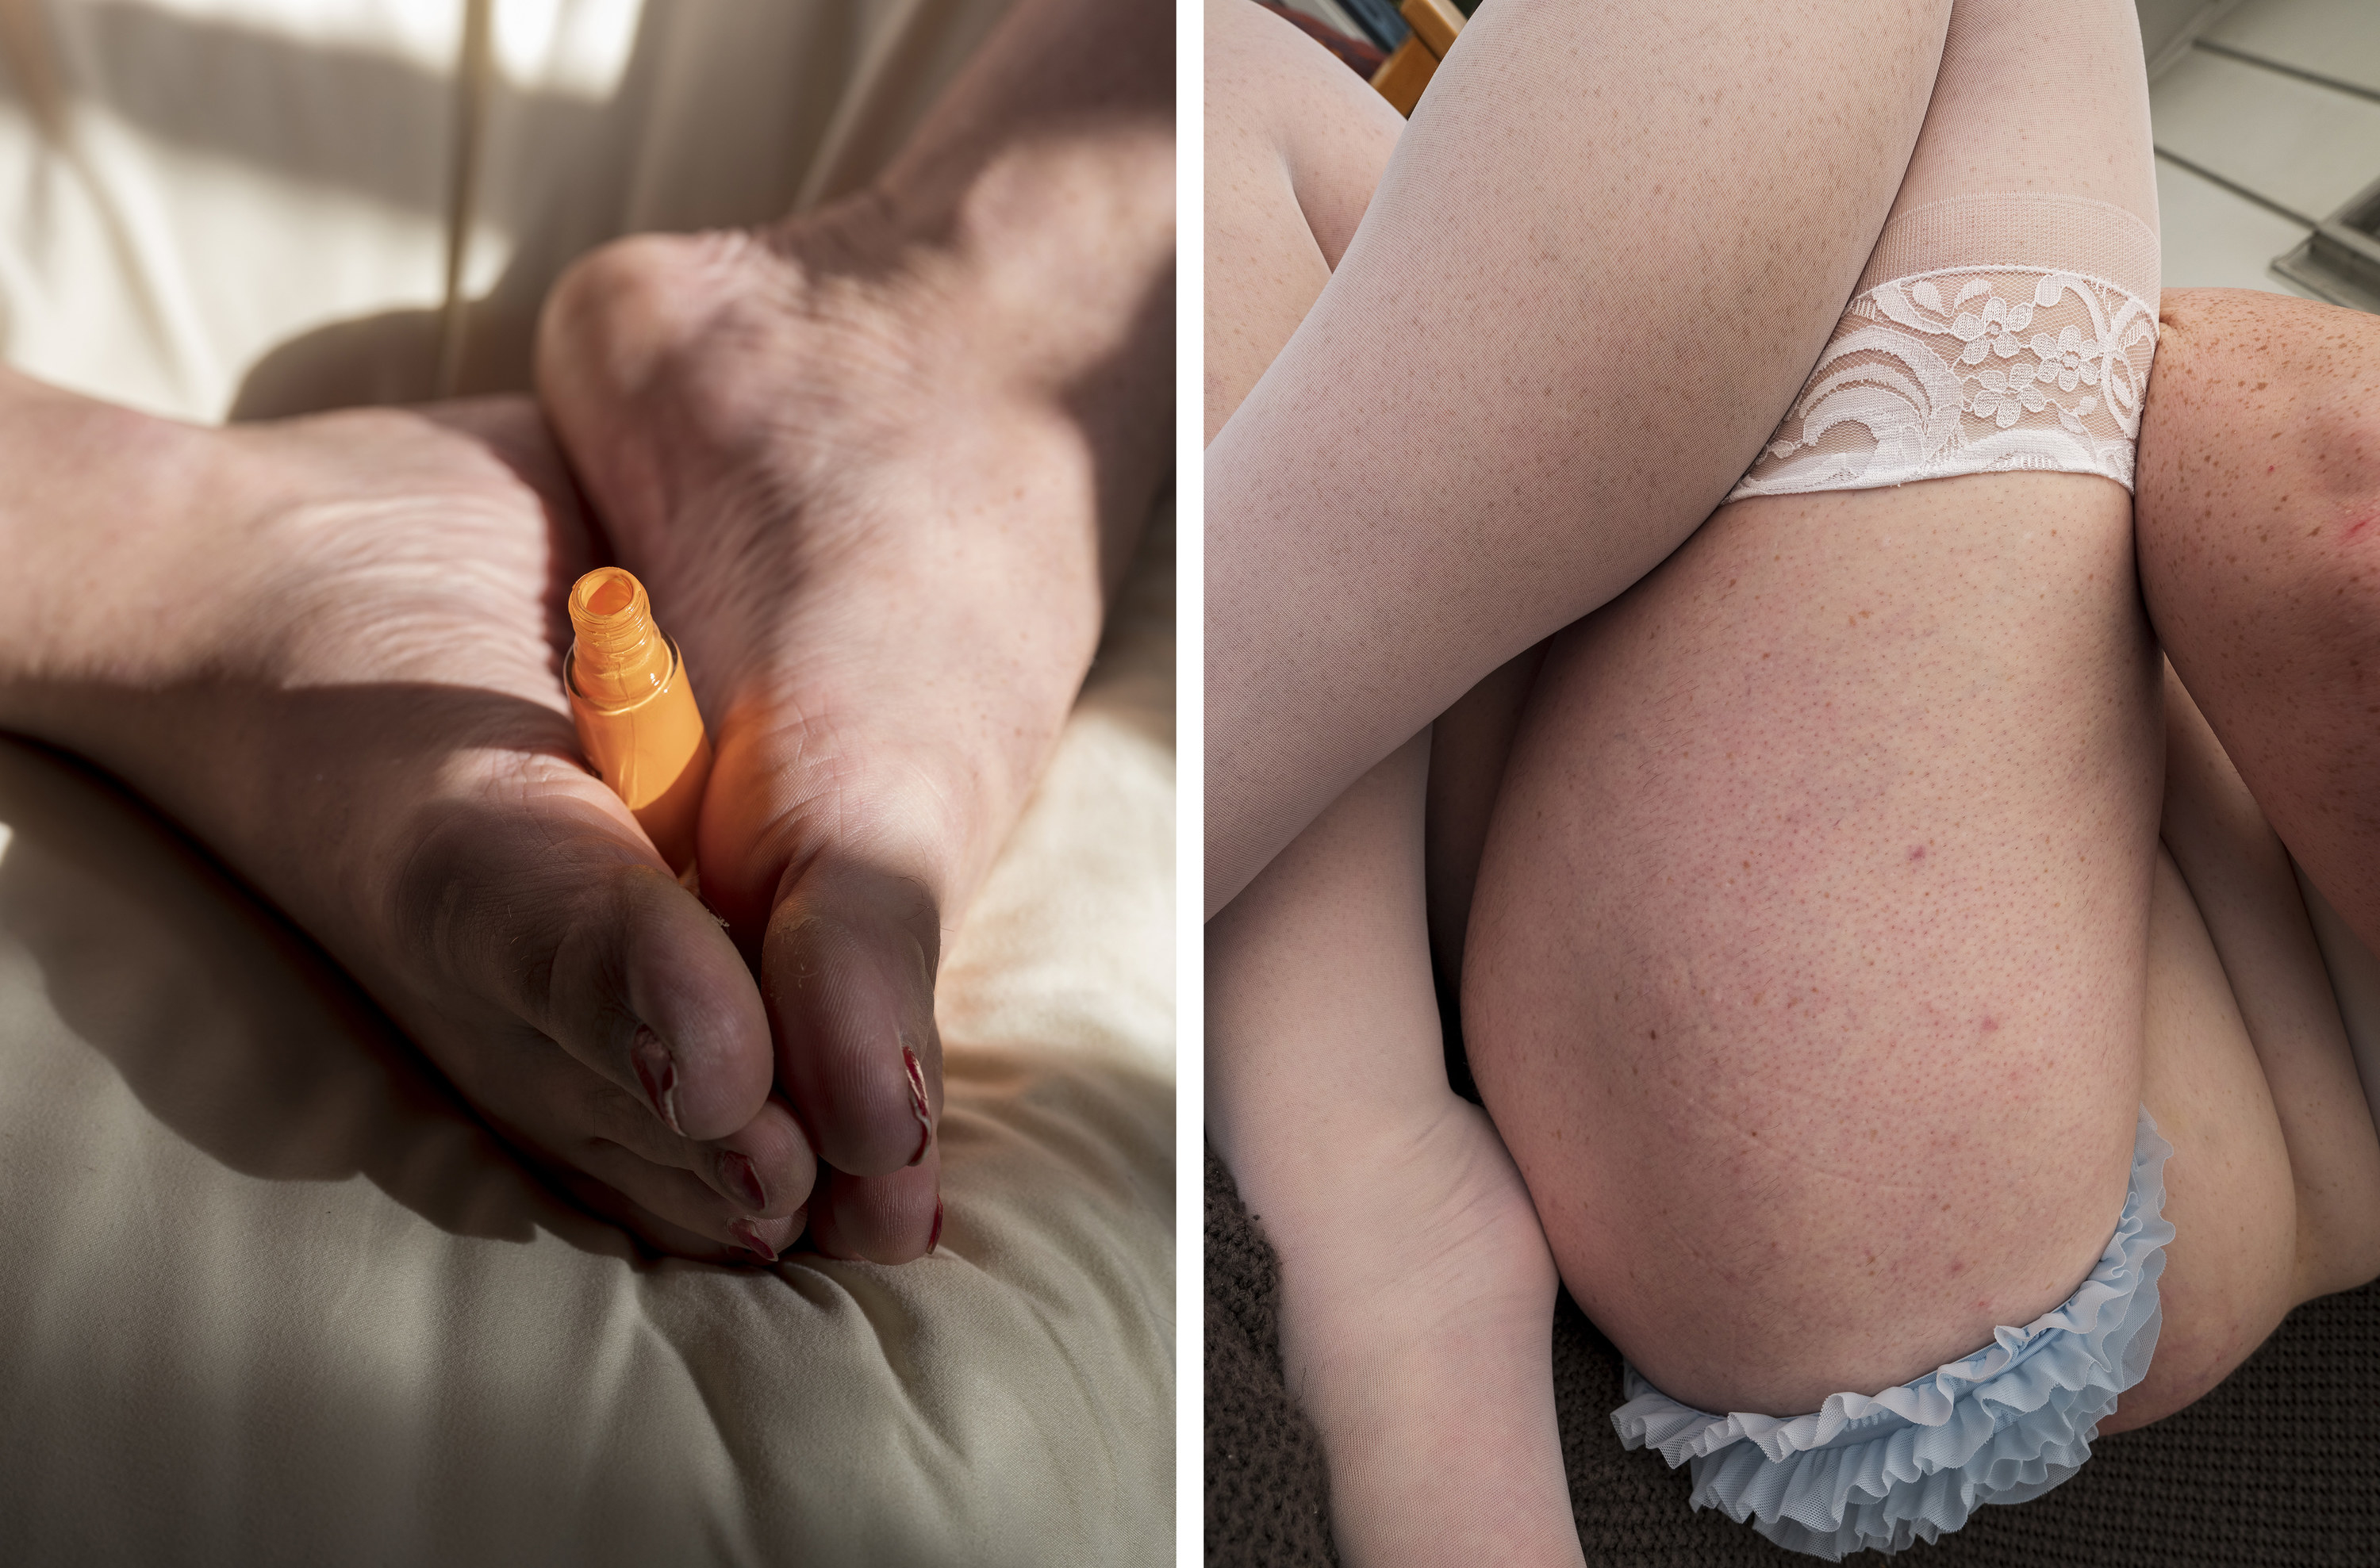 left, two feet hold an orange nail polish bottle. right, a person wearing a frilly pair of panties and lace stockings